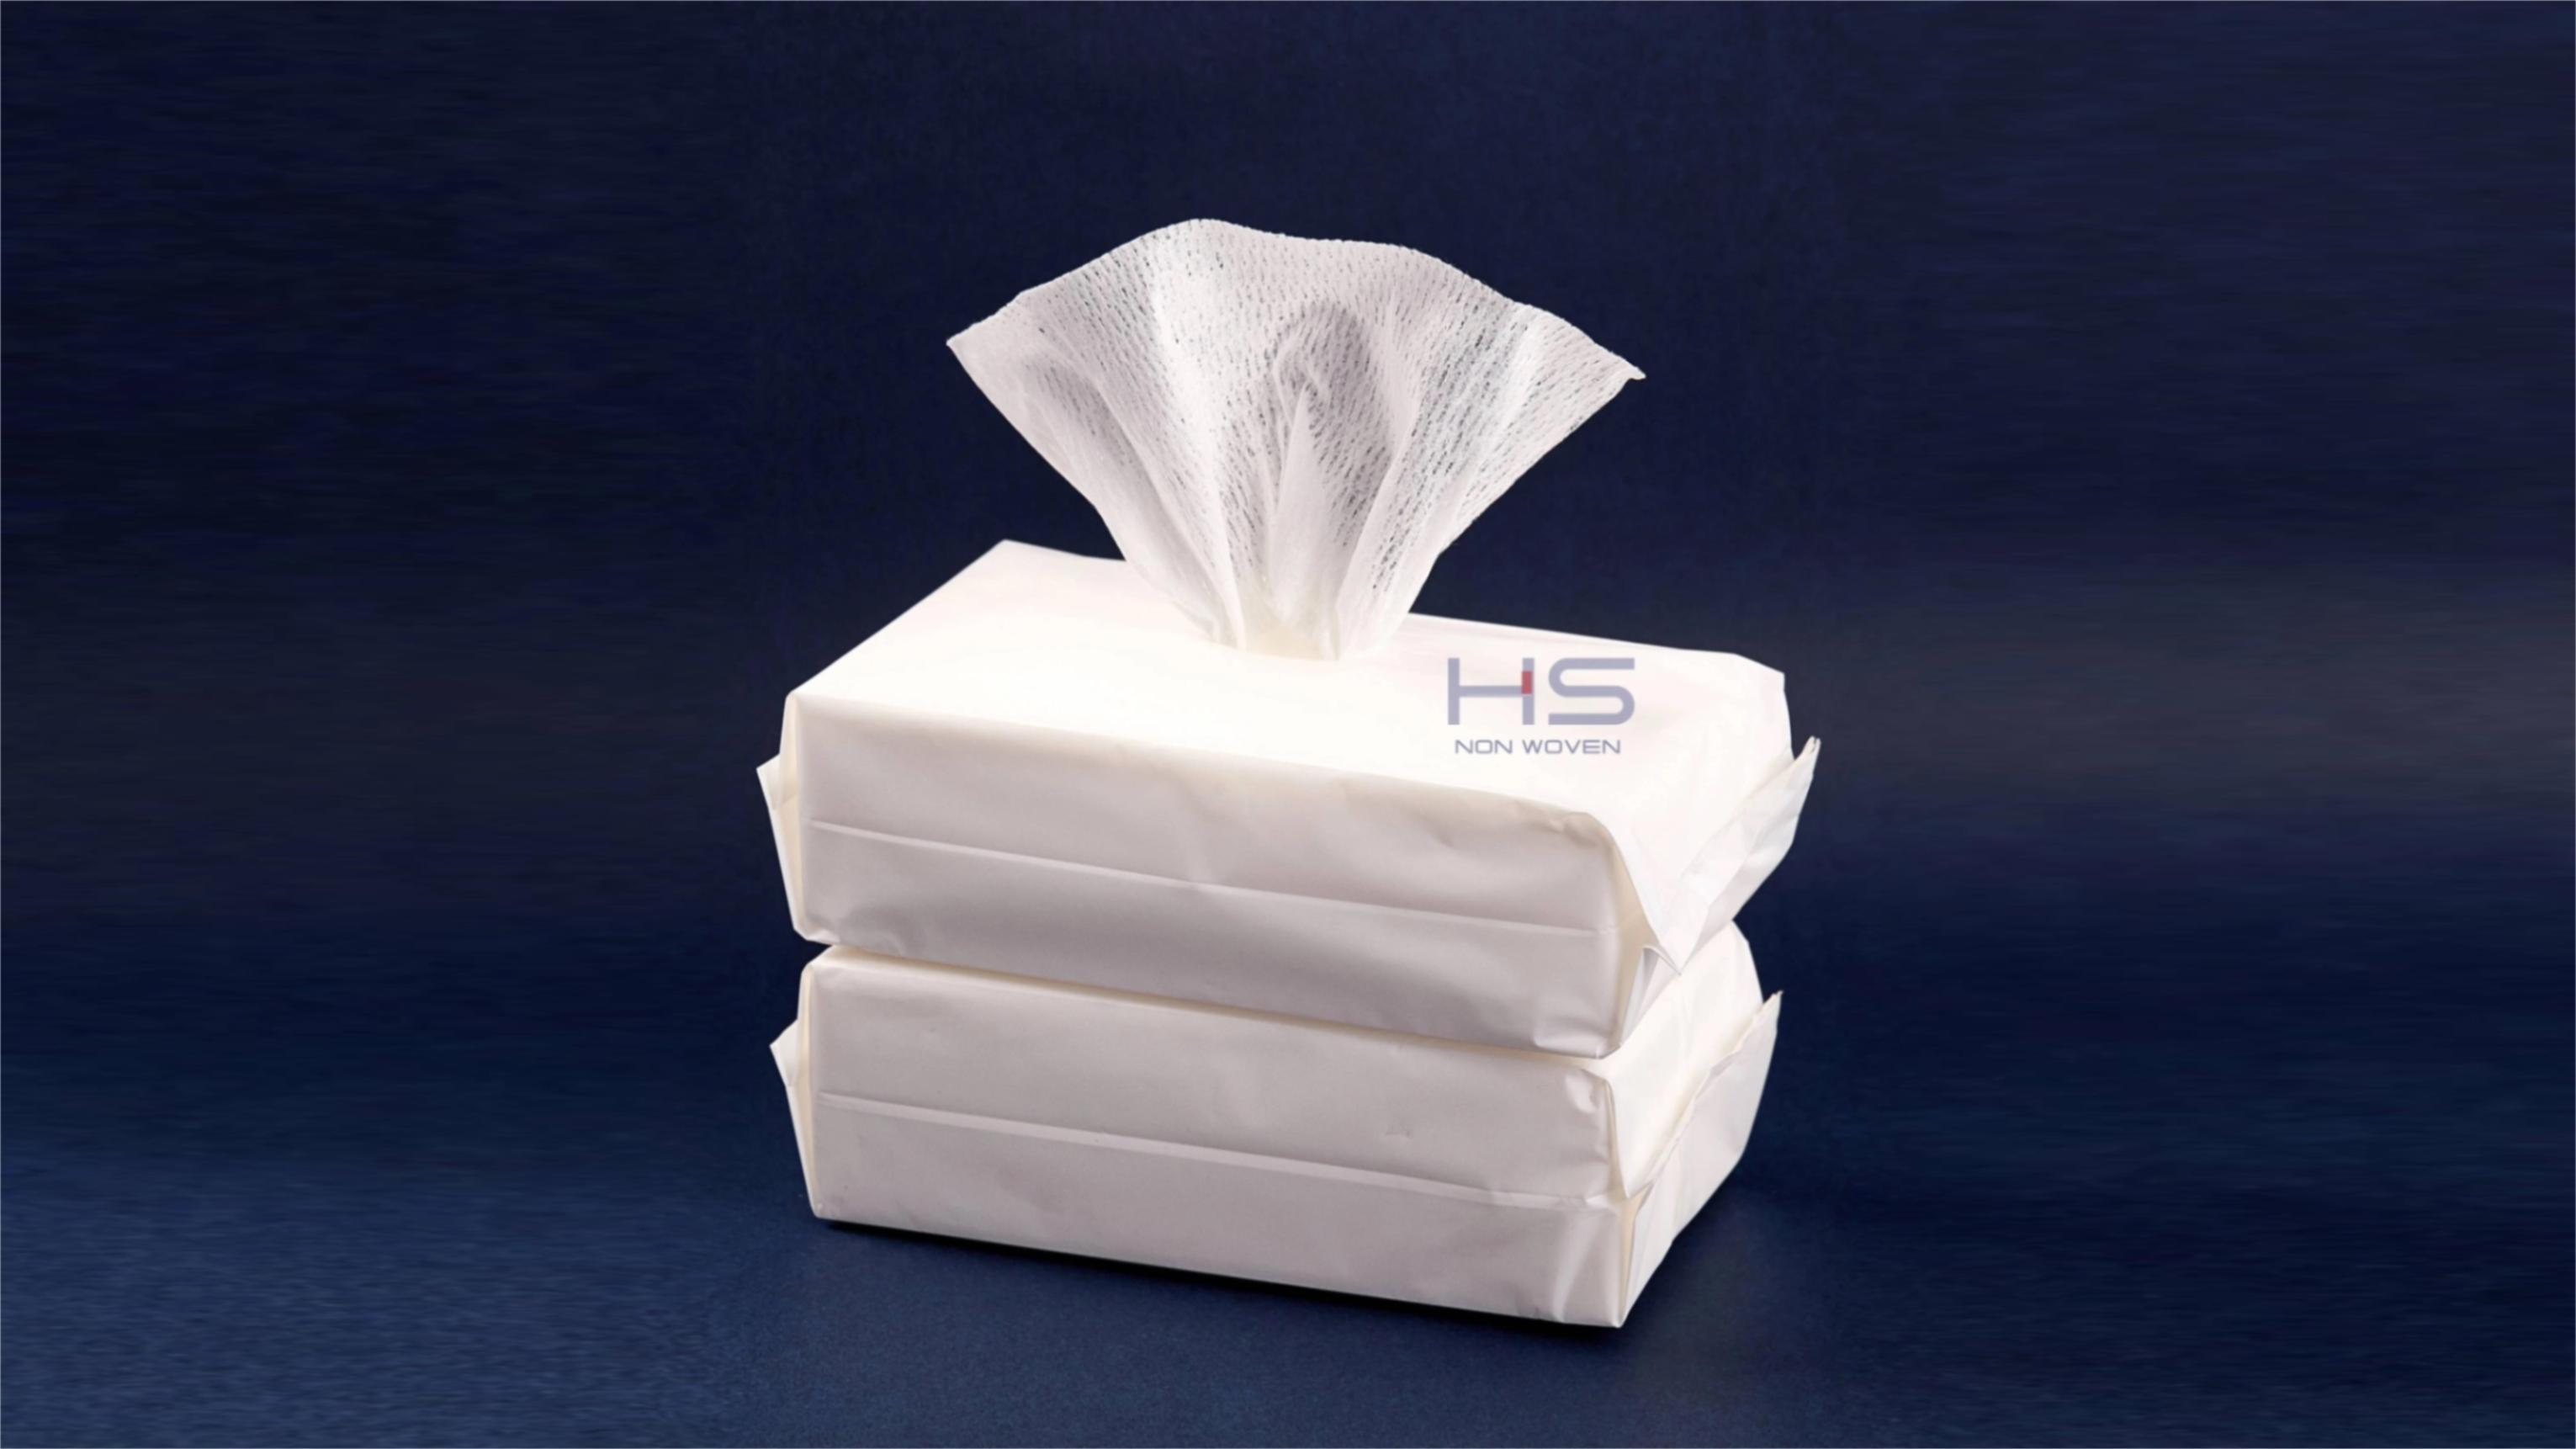 https://www.hsnonvonweed.com/facial-dry-towel-product/